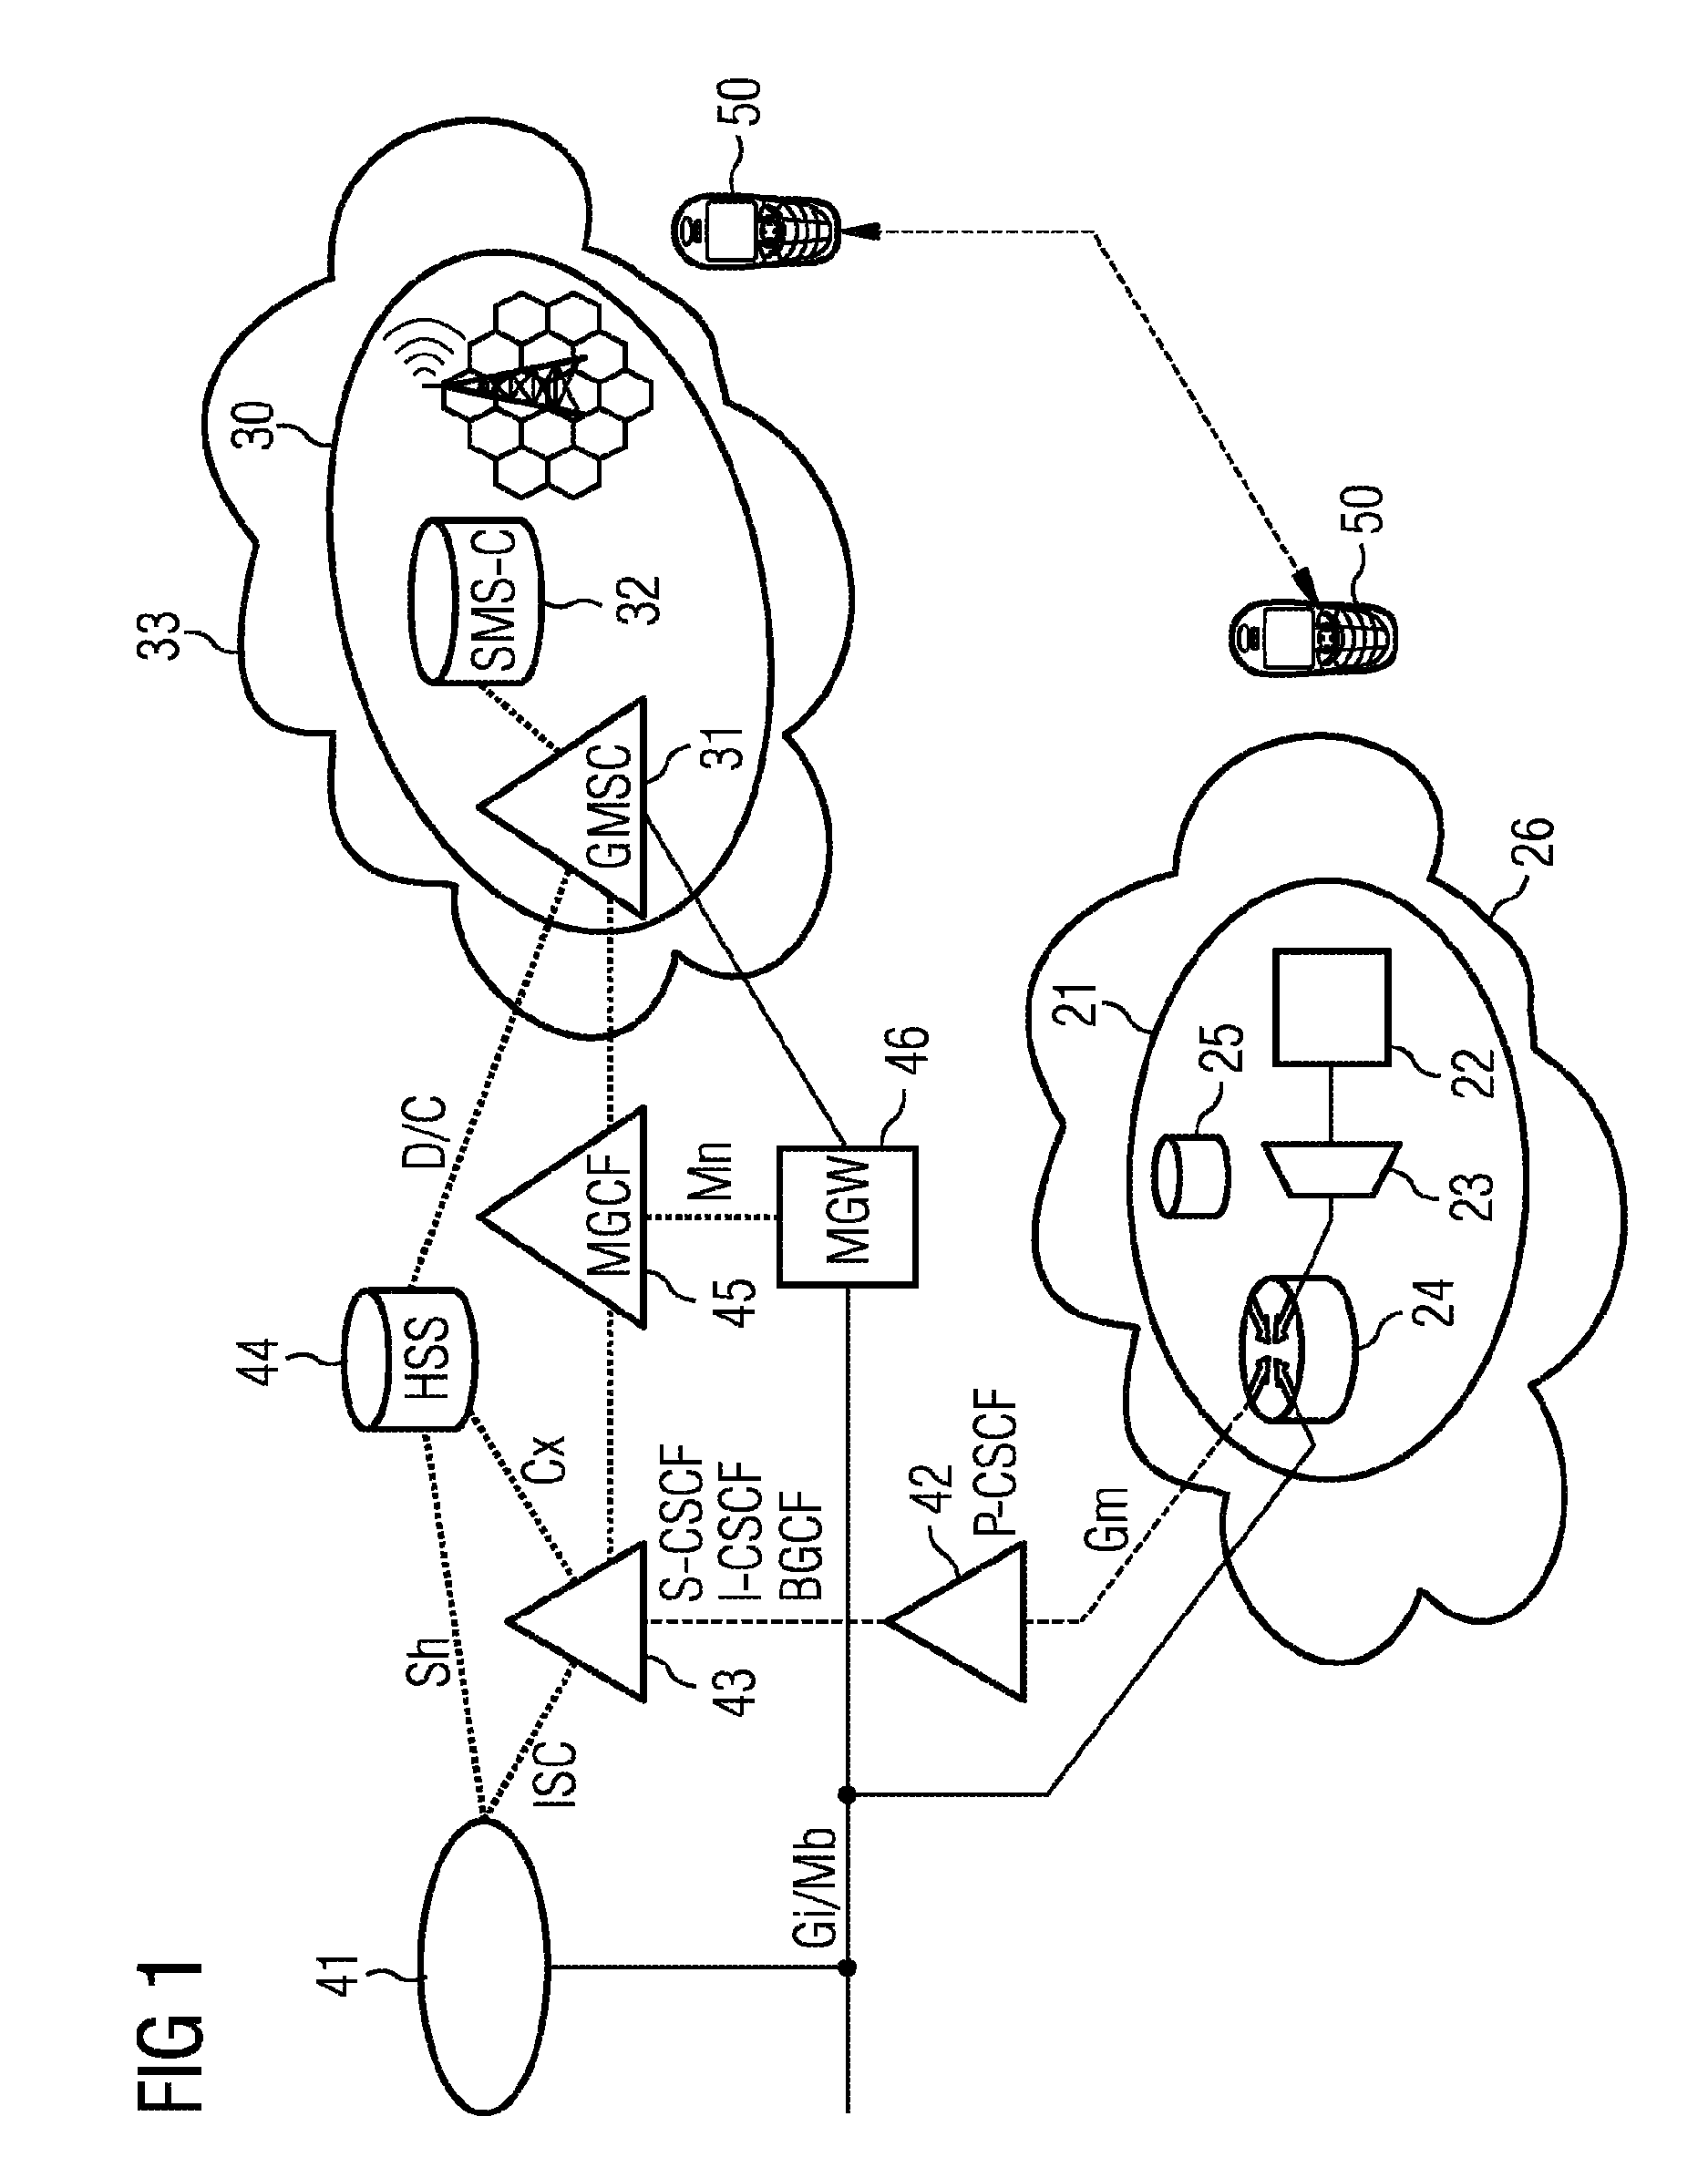 Method for providing subscriptions to packet-switched networks